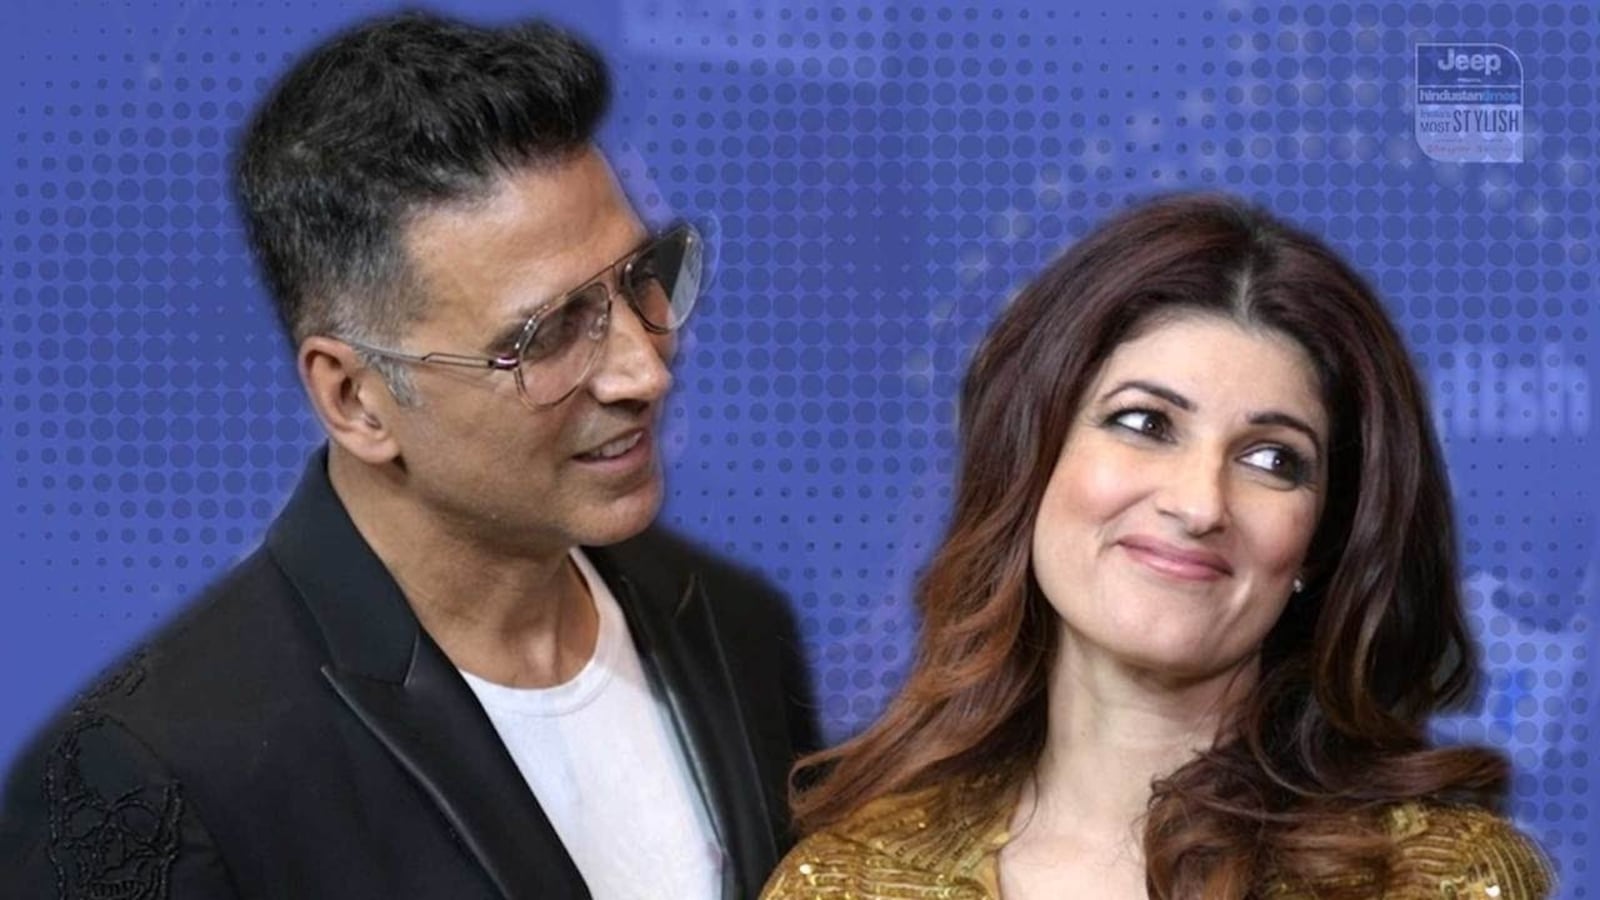 Twinkle Khanna Ka Xvideo - Twinkle Khanna gets advice on 'what not to write' by Akshay: 'I touch her  feet' | Web Series - Hindustan Times